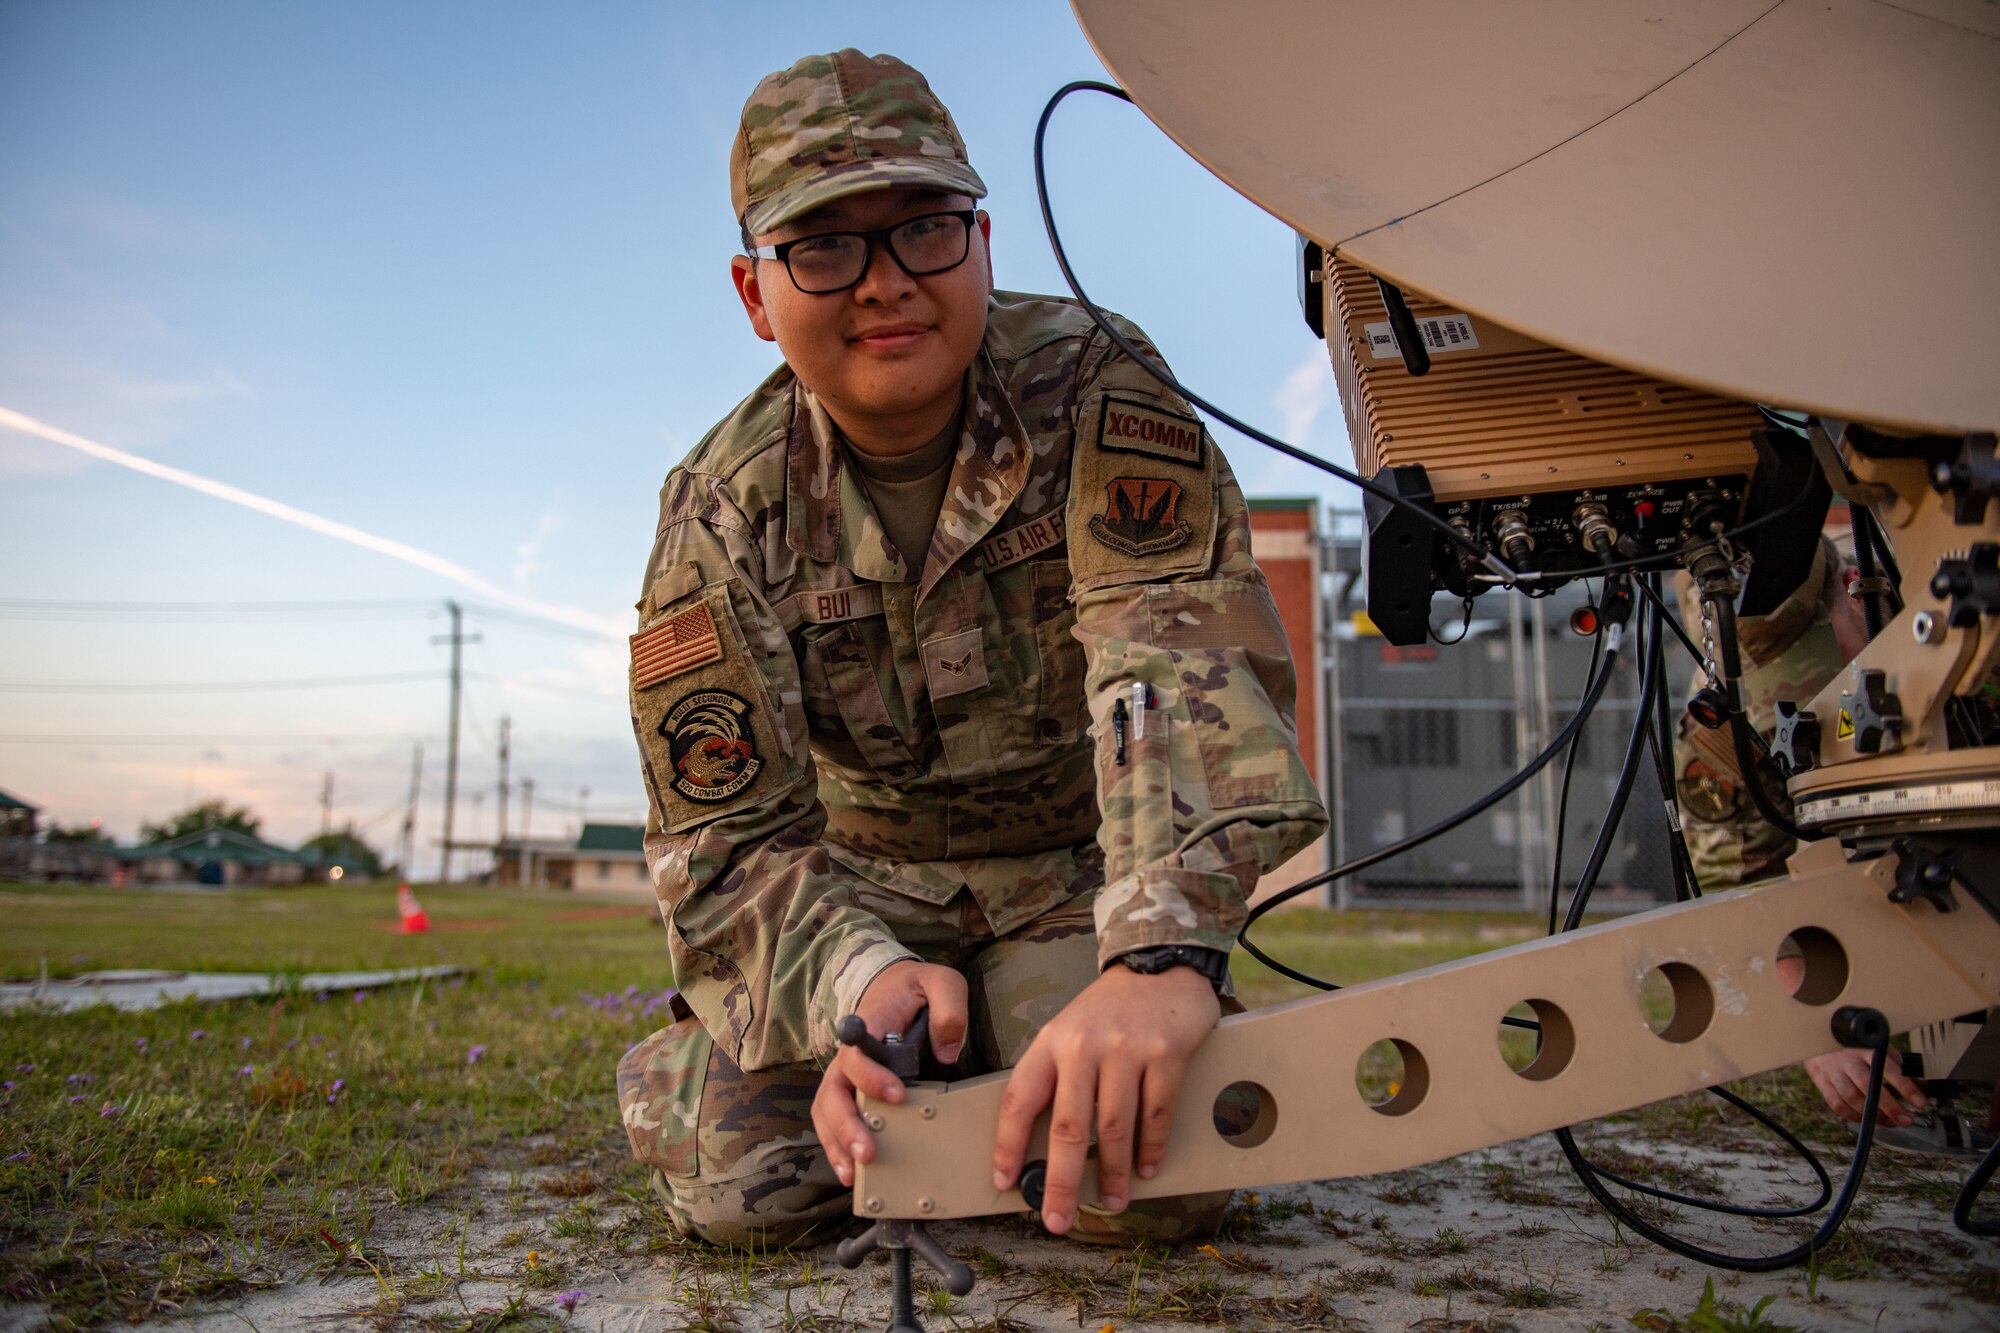 U.S. Air Force Airman 1st Class Bui Bryant, 52nd Combat Communication Squadron radio frequency operator, sets up an airbus 1.2 antenna during Exercise Ready Tiger  24-1 at Savannah Air National Guard Base, Georgia, April 8, 2024. Ready Tiger 24-1 is a readiness exercise demonstrating the 23rd Wing’s ability to plan, prepare and execute operations and maintenance to project air power in contested and dispersed locations, defending the United States’ interests and allies. (U.S. Air Force photo by Senior Airman Courtney Sebastianelli)